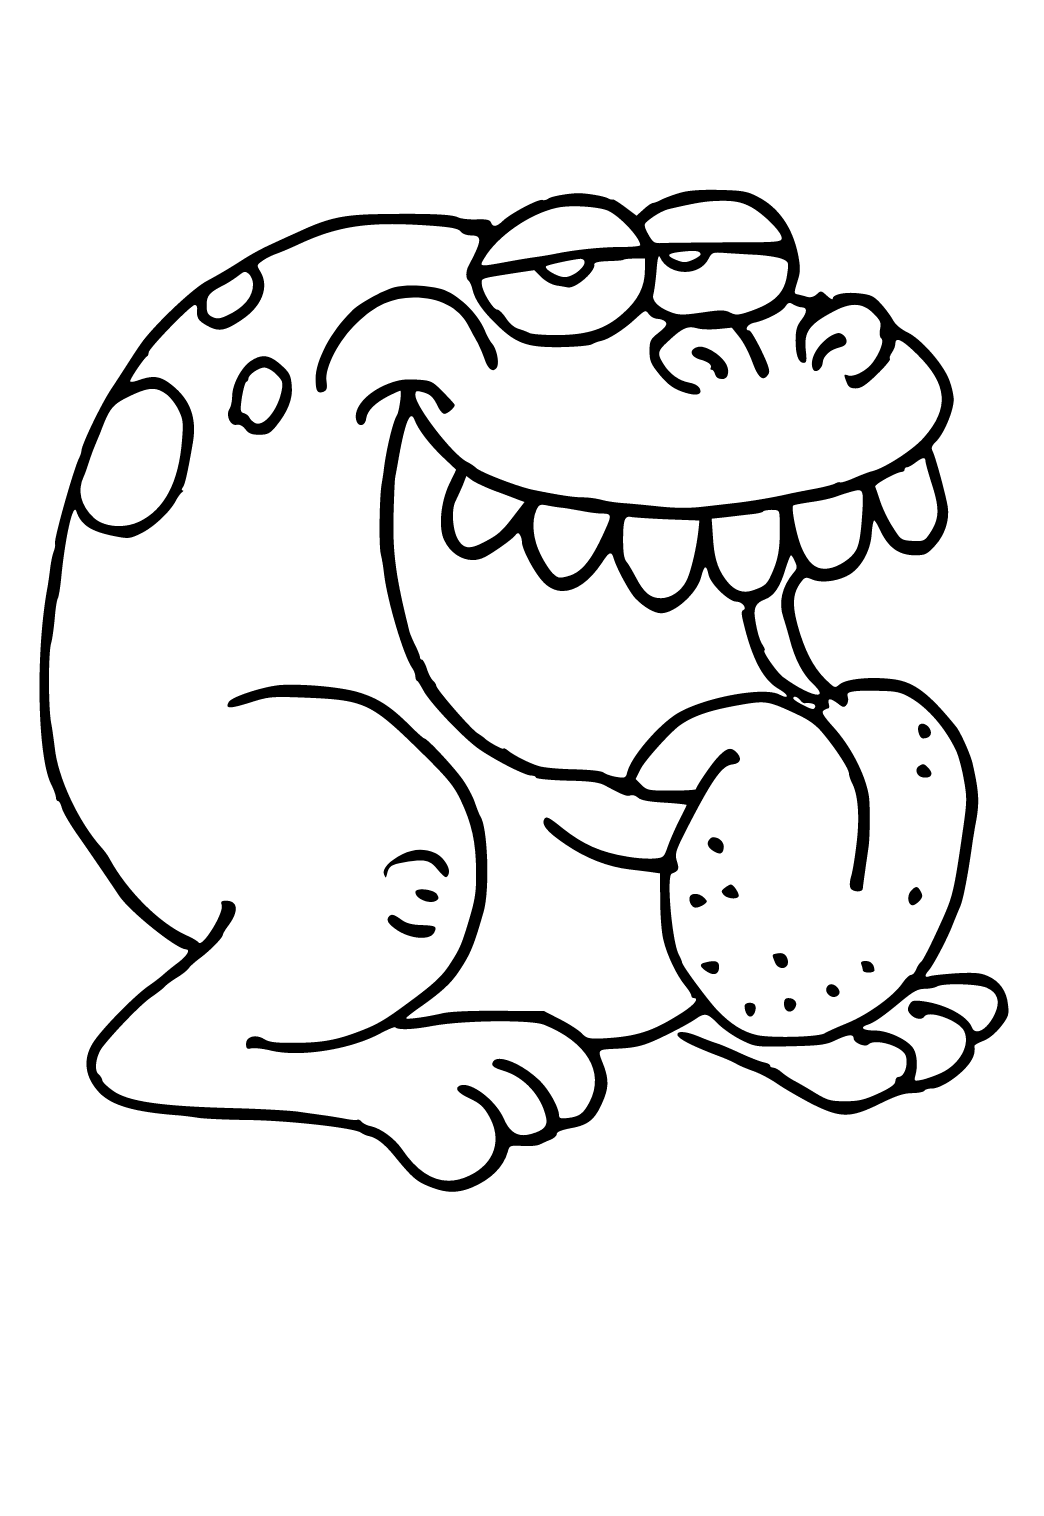 Free printable funny toad coloring page for adults and kids